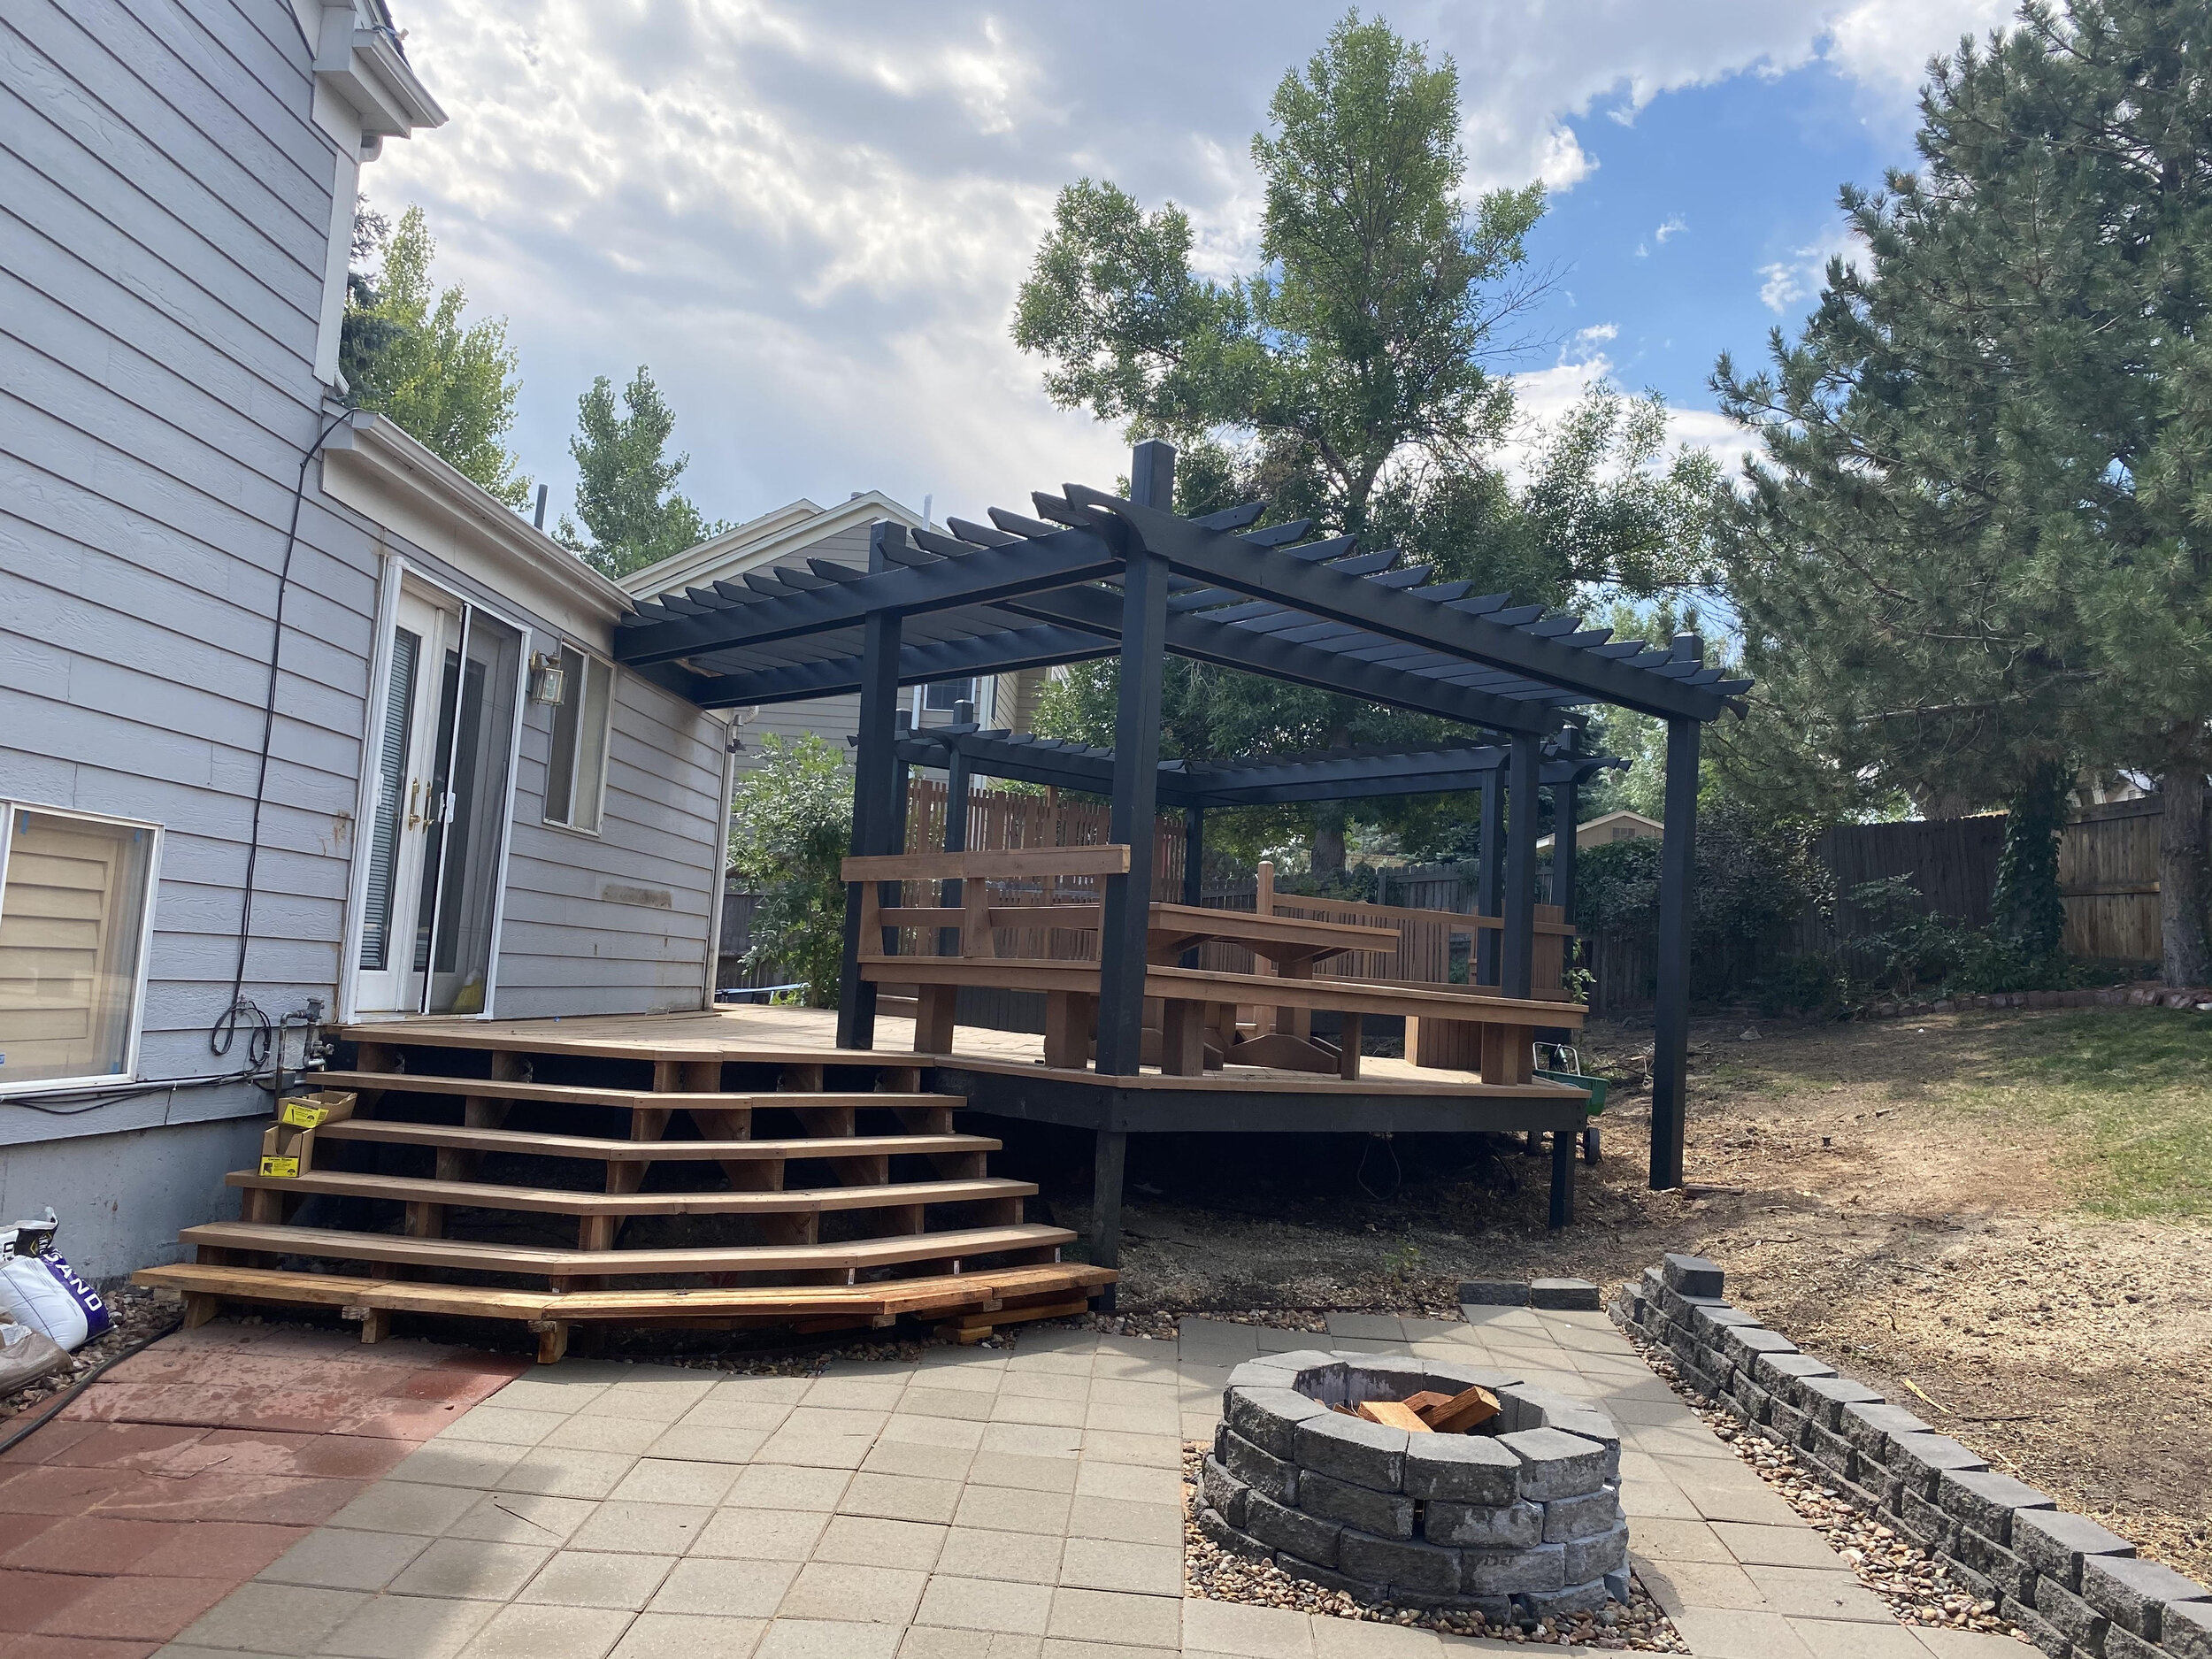 Pergola build, staining and painting